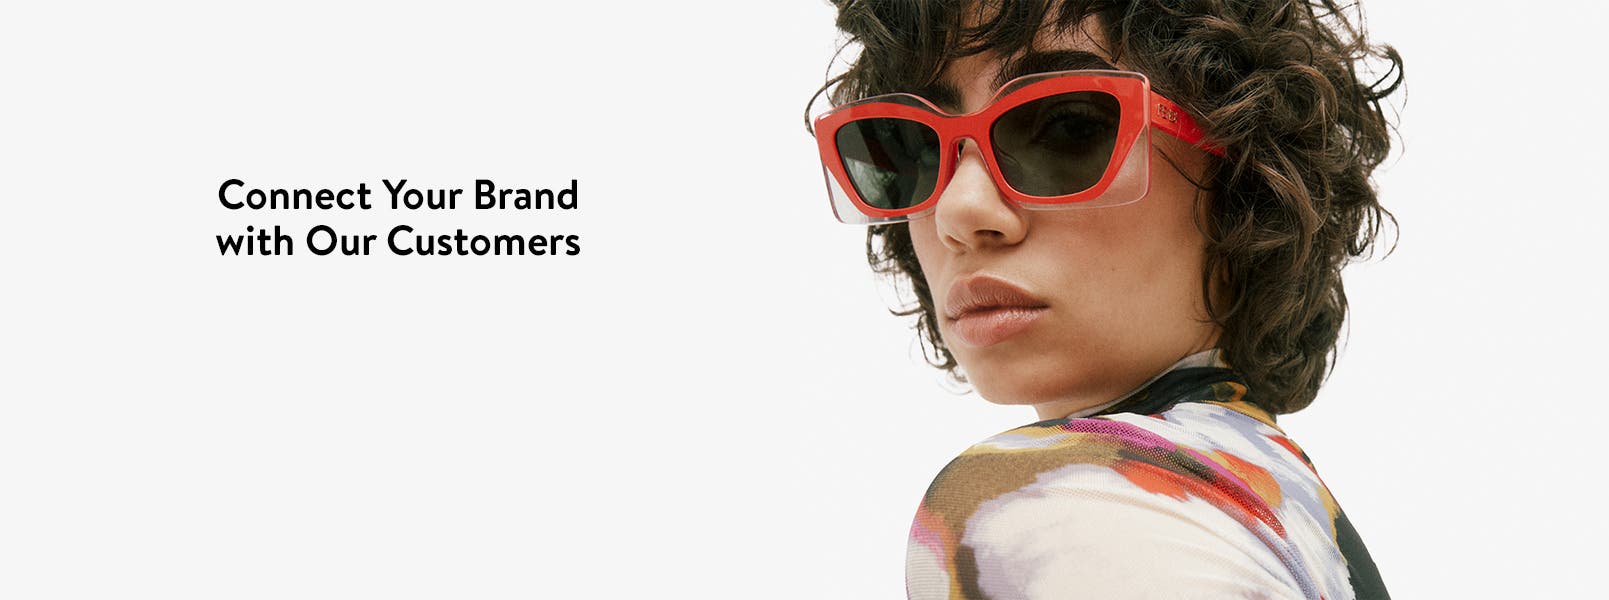 Connect Your Brand with Our Customers. A woman in red sunglasses looking over her shoulder.